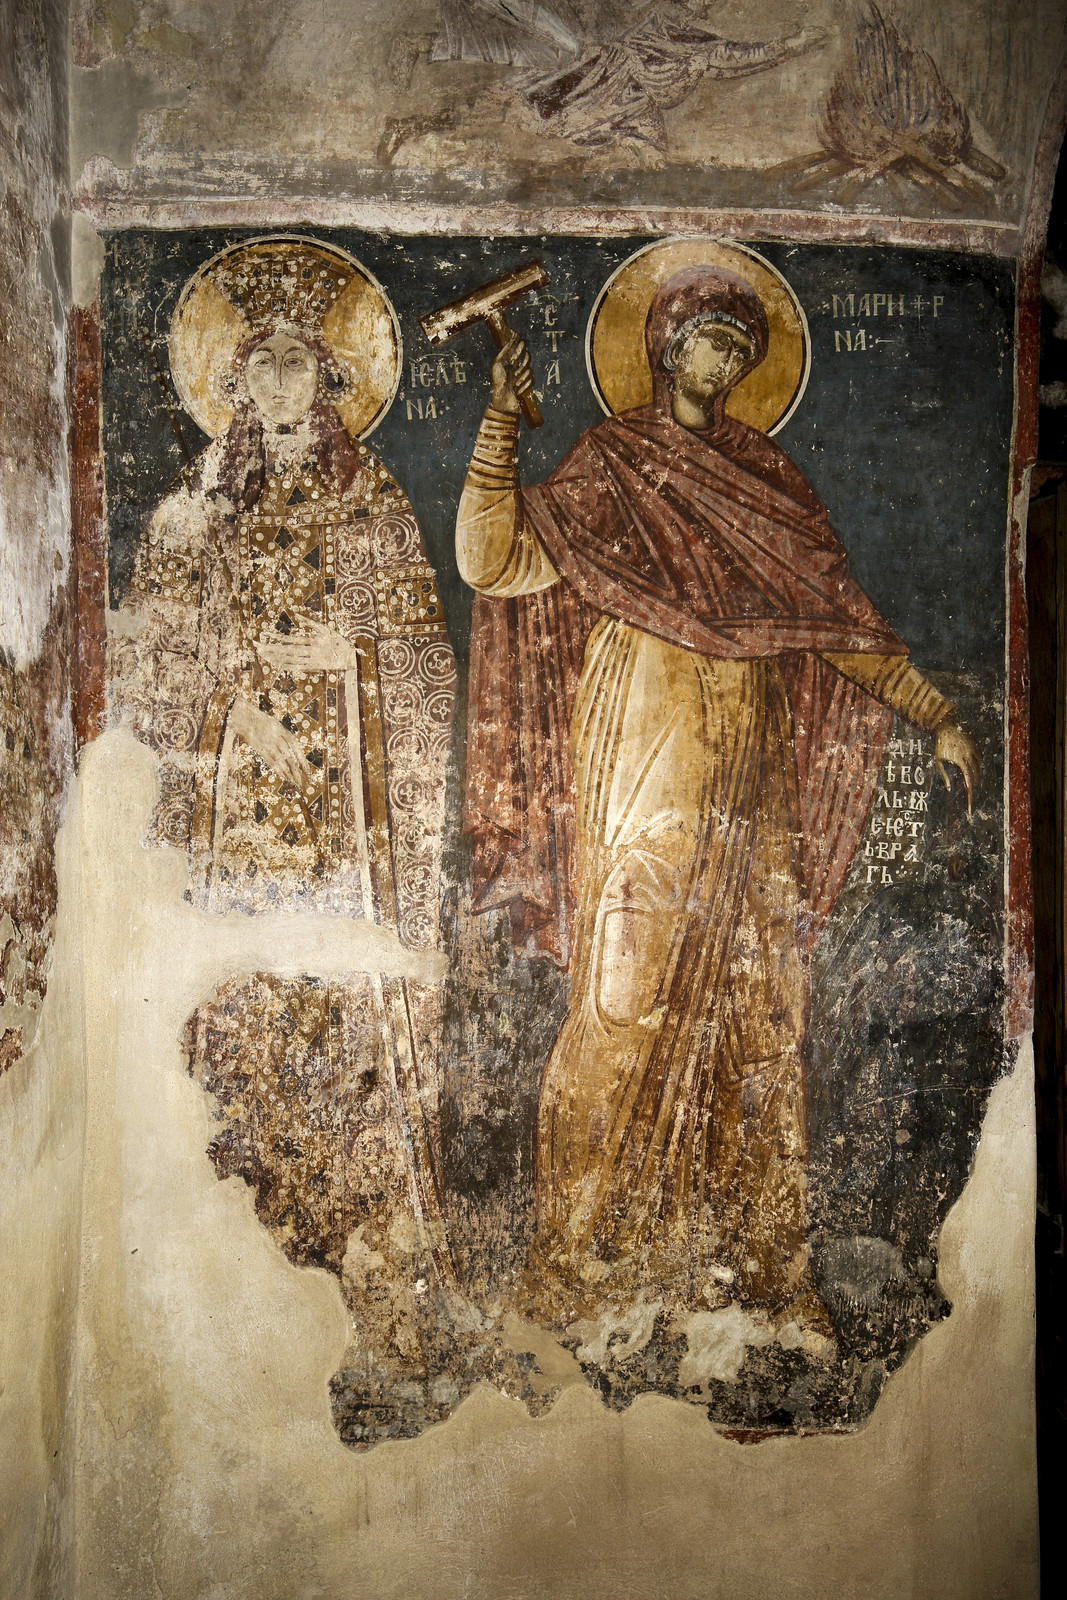 Queen Jelena of Serbia and St. Marina (St. Margaret of Antioch)